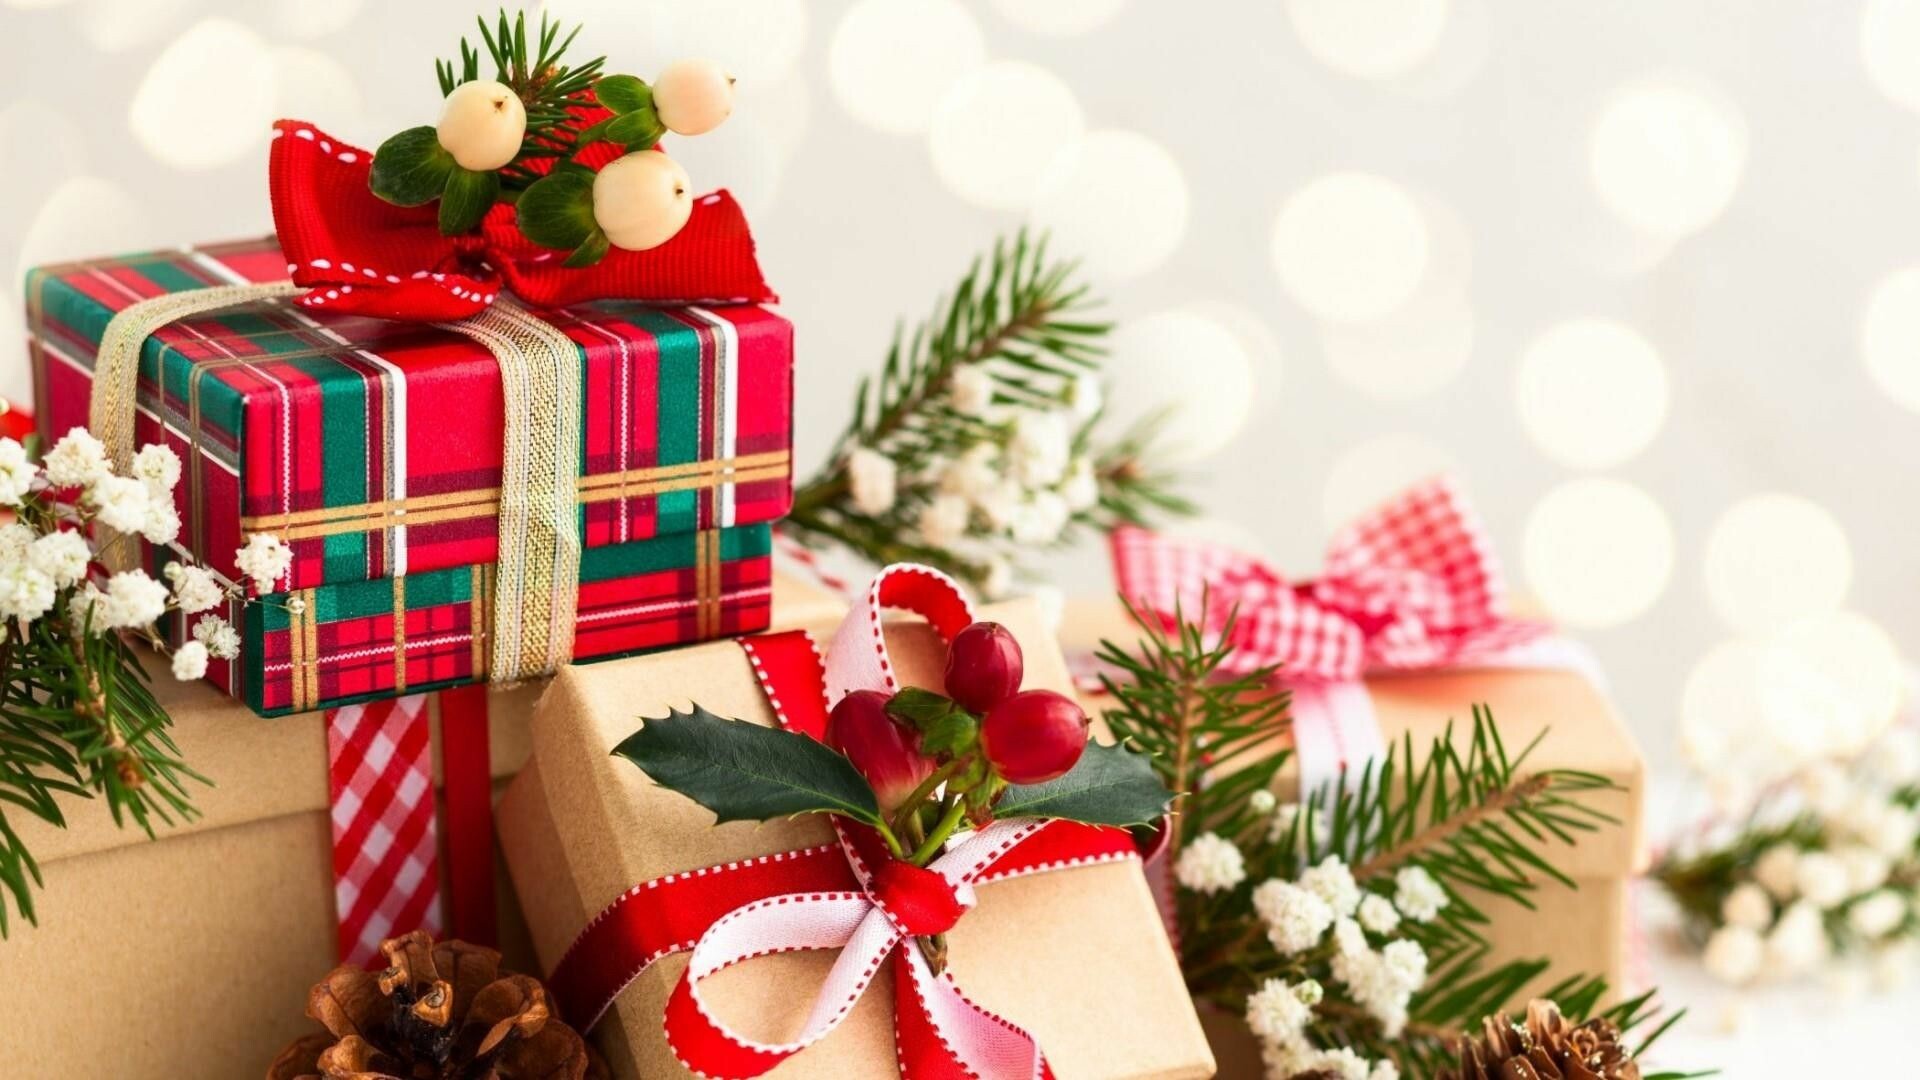 Gifts, Festive surprises, Thoughtful presents, Gift exchange, 1920x1080 Full HD Desktop